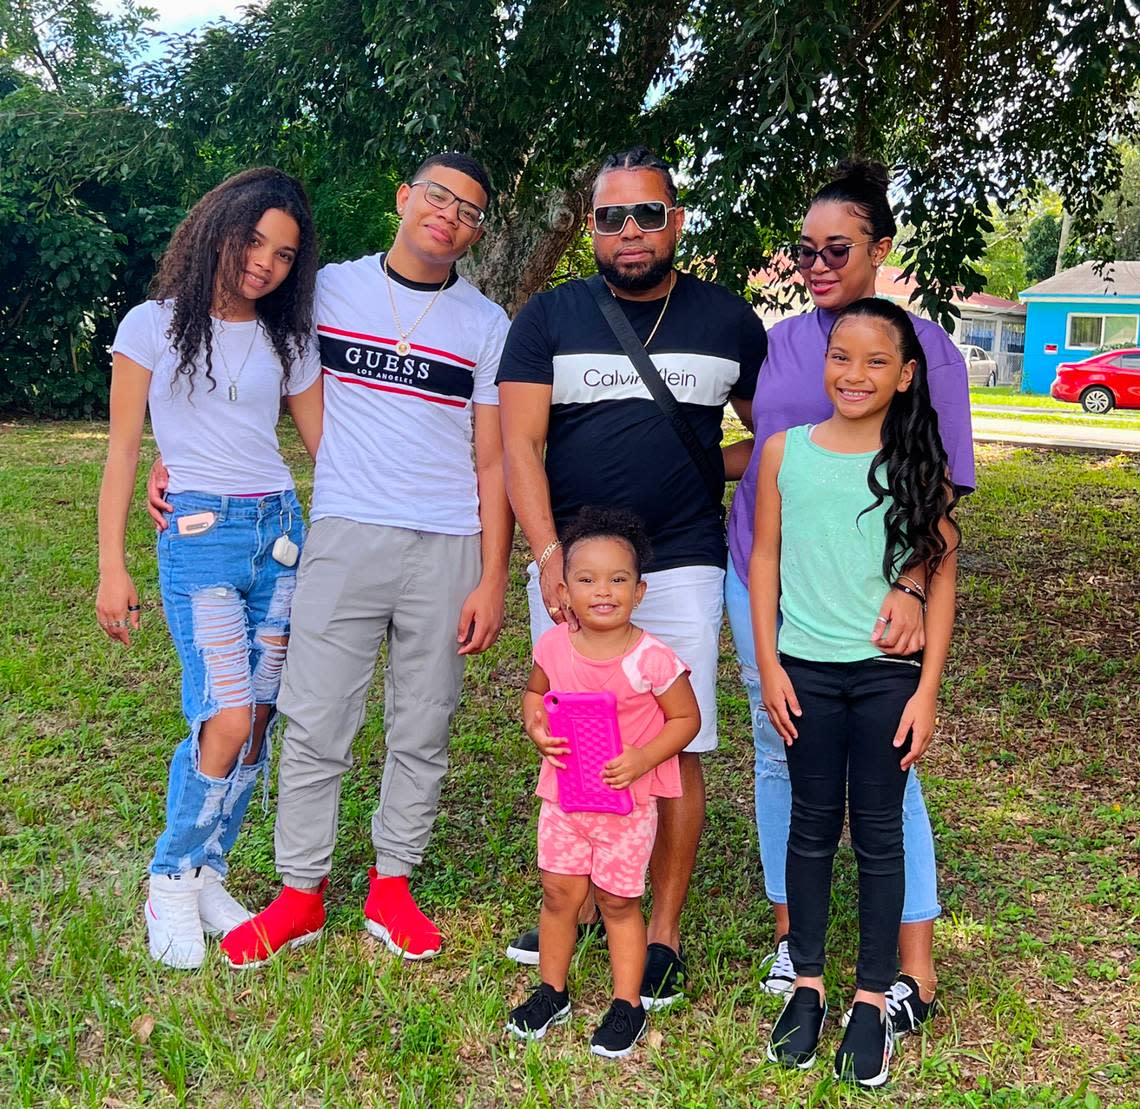 Cristiàn Batista (middle) with his five kids: Steicy, Cristal, Nashly, Erick, and Lesly outside their house in Hollywood.